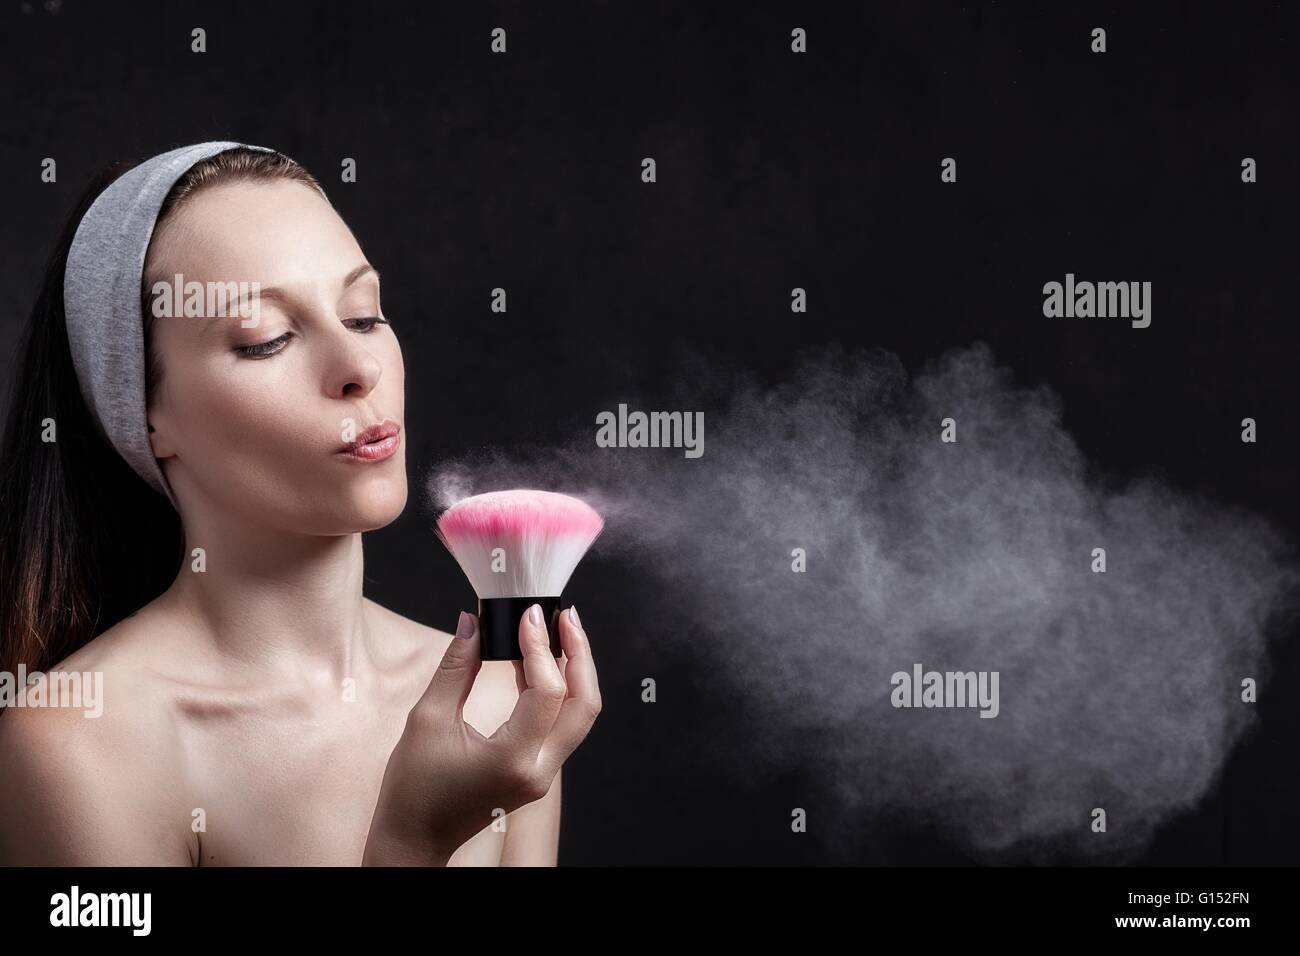 Young woman blows on a makeup brush Stock Photo